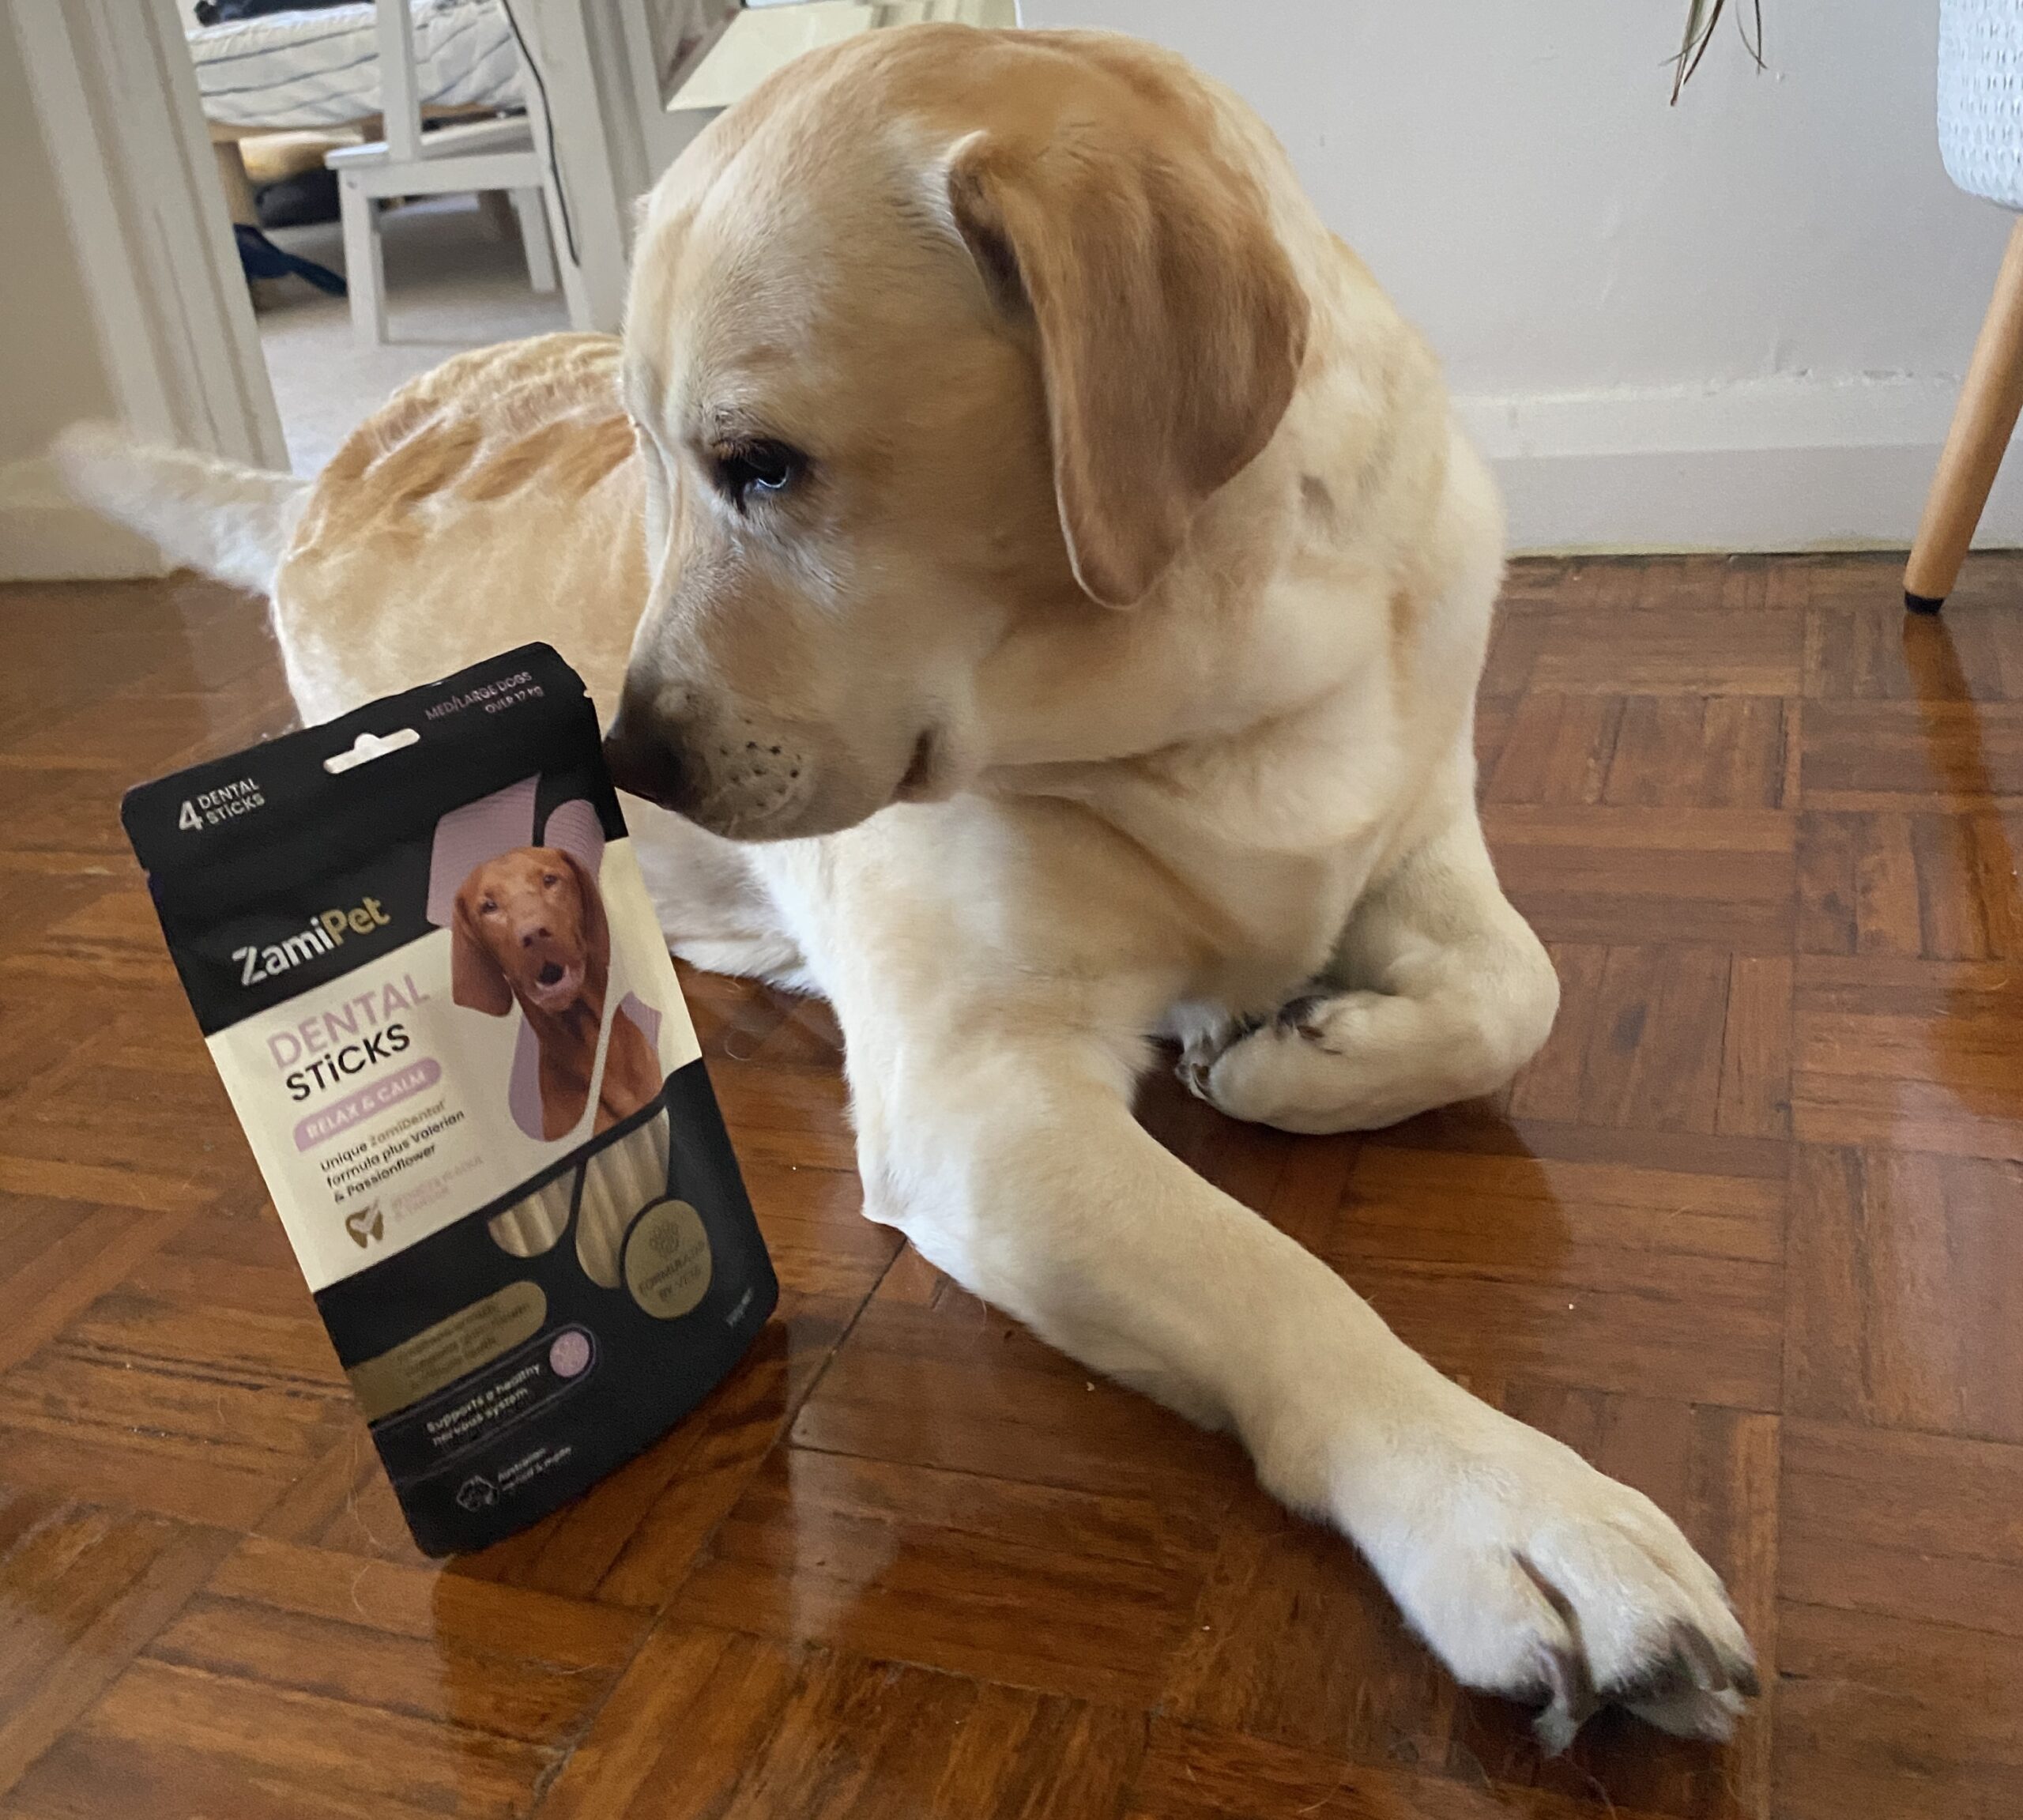 Ellie the Labrador looking at her ZamiPet dental stick treats